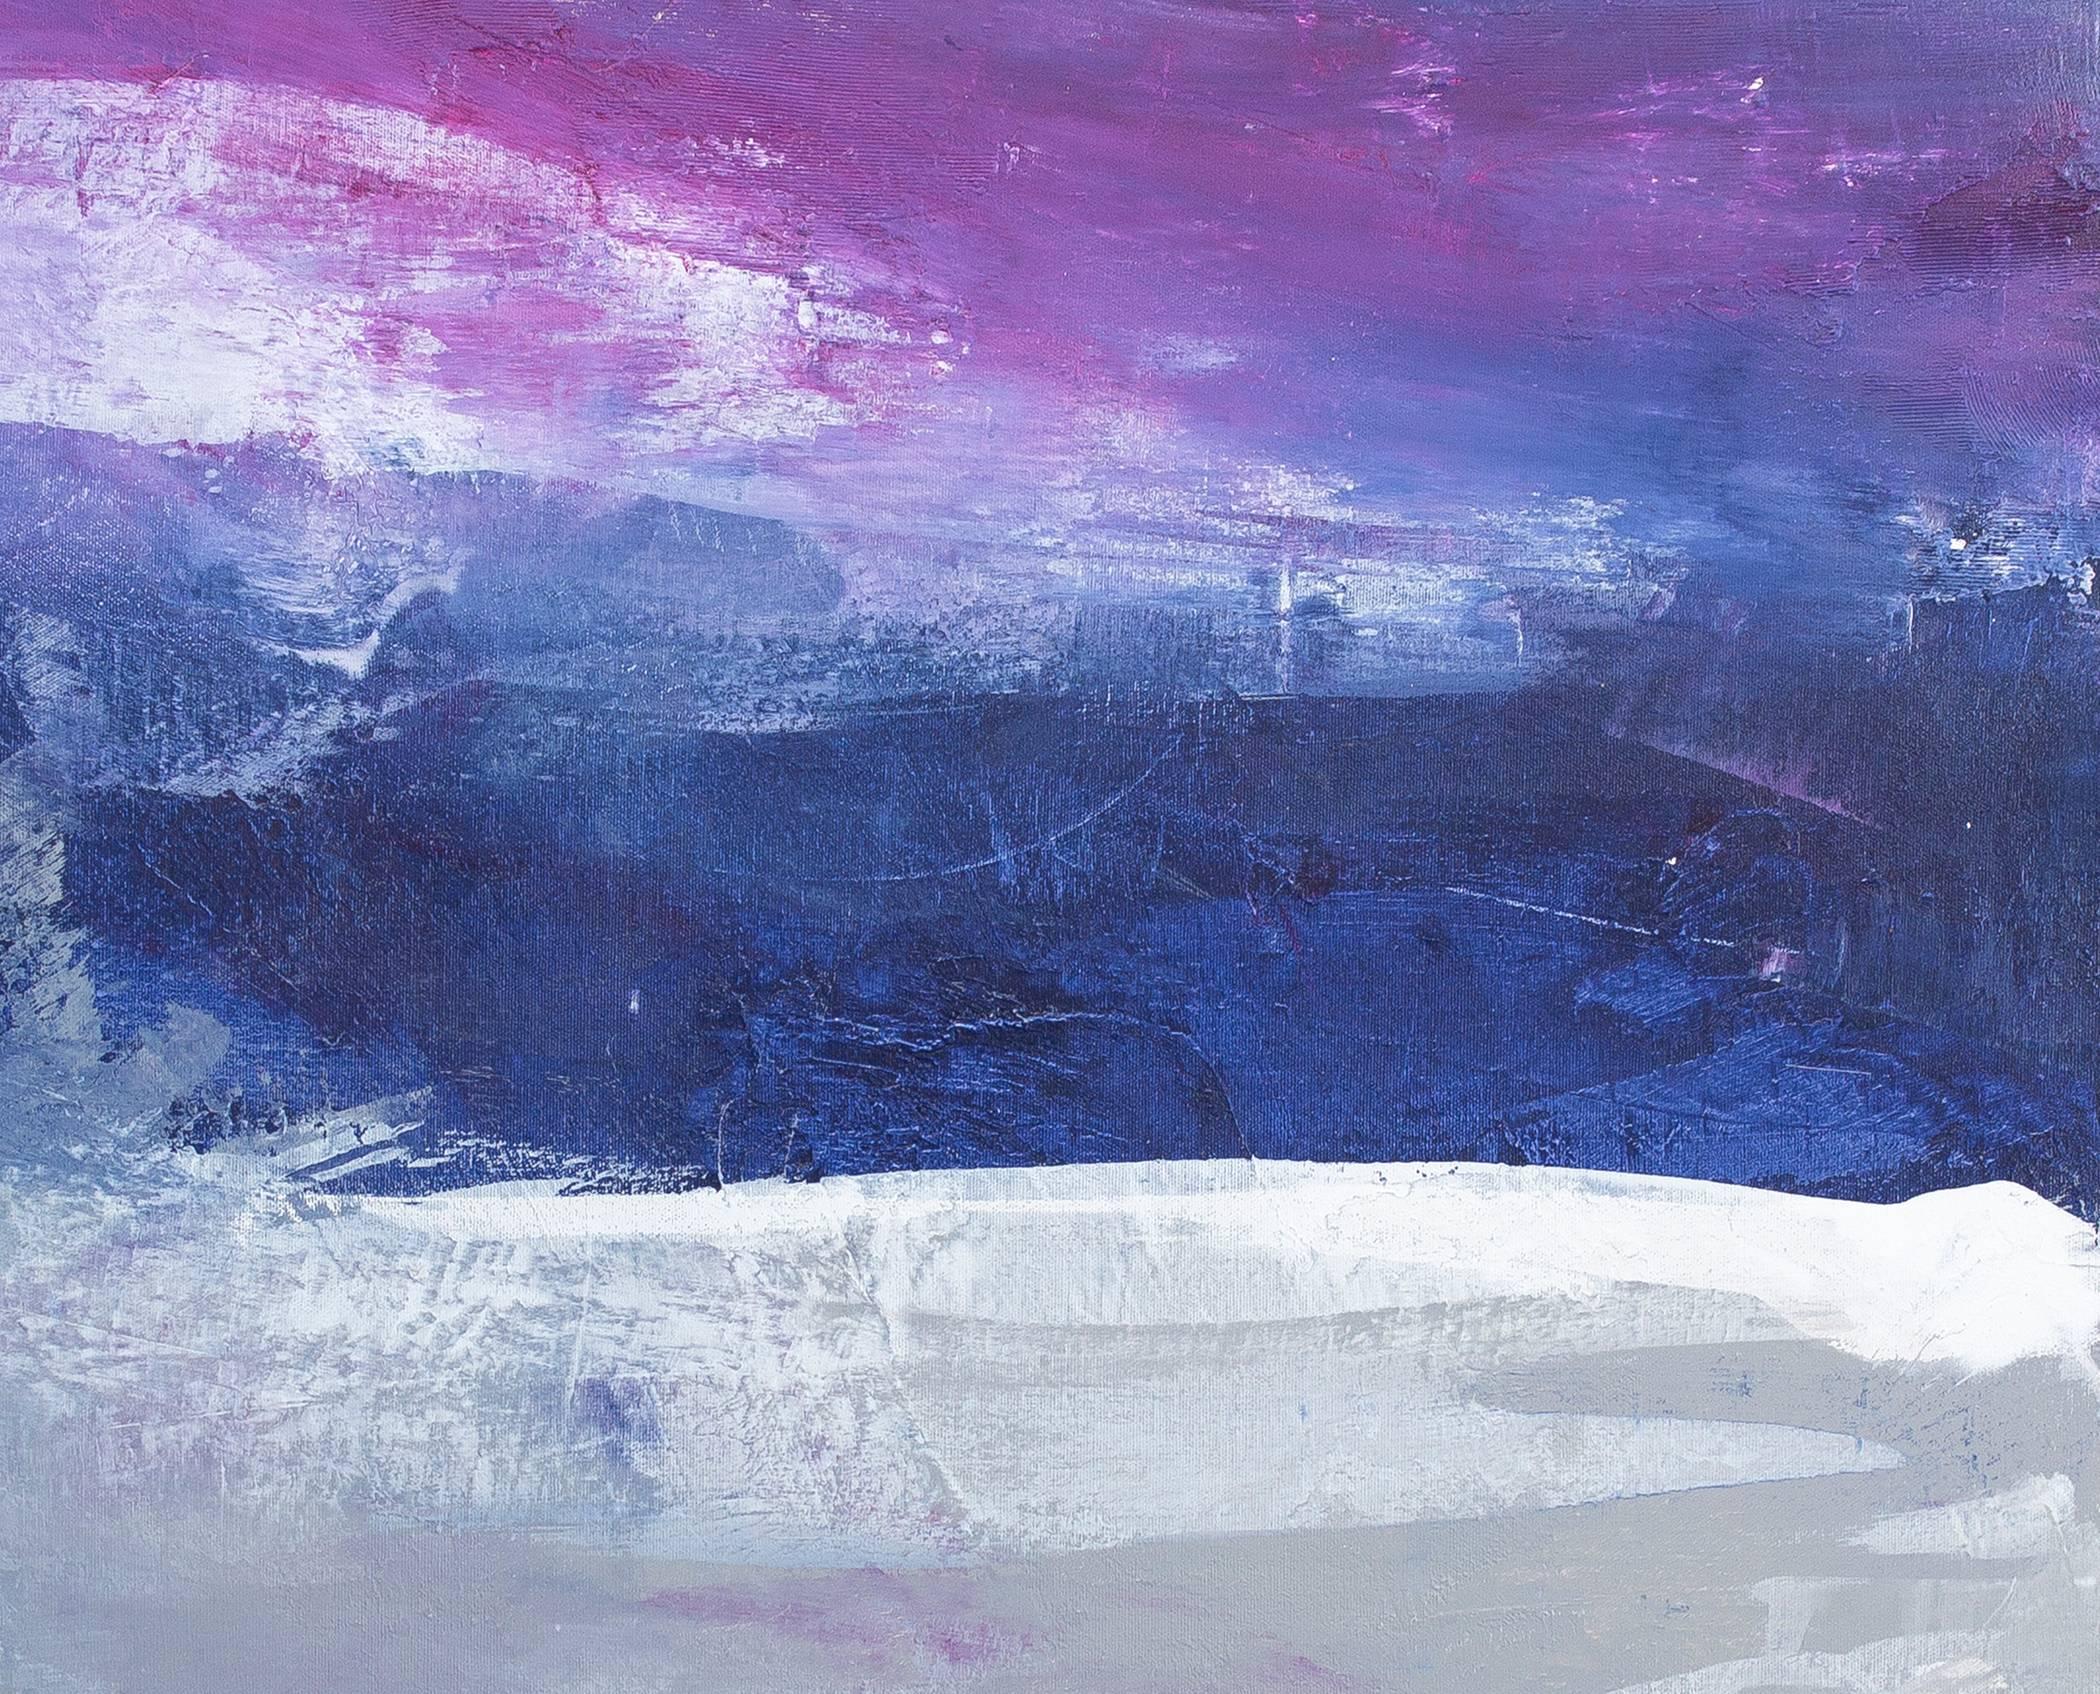 This abstract painting by Julia Contacessi pairs a vibrant hue of purple with deep blue, silver grey and white. Large strokes of paint are layered in each color over top of one another to create texture. Of this painting, the artist says, 